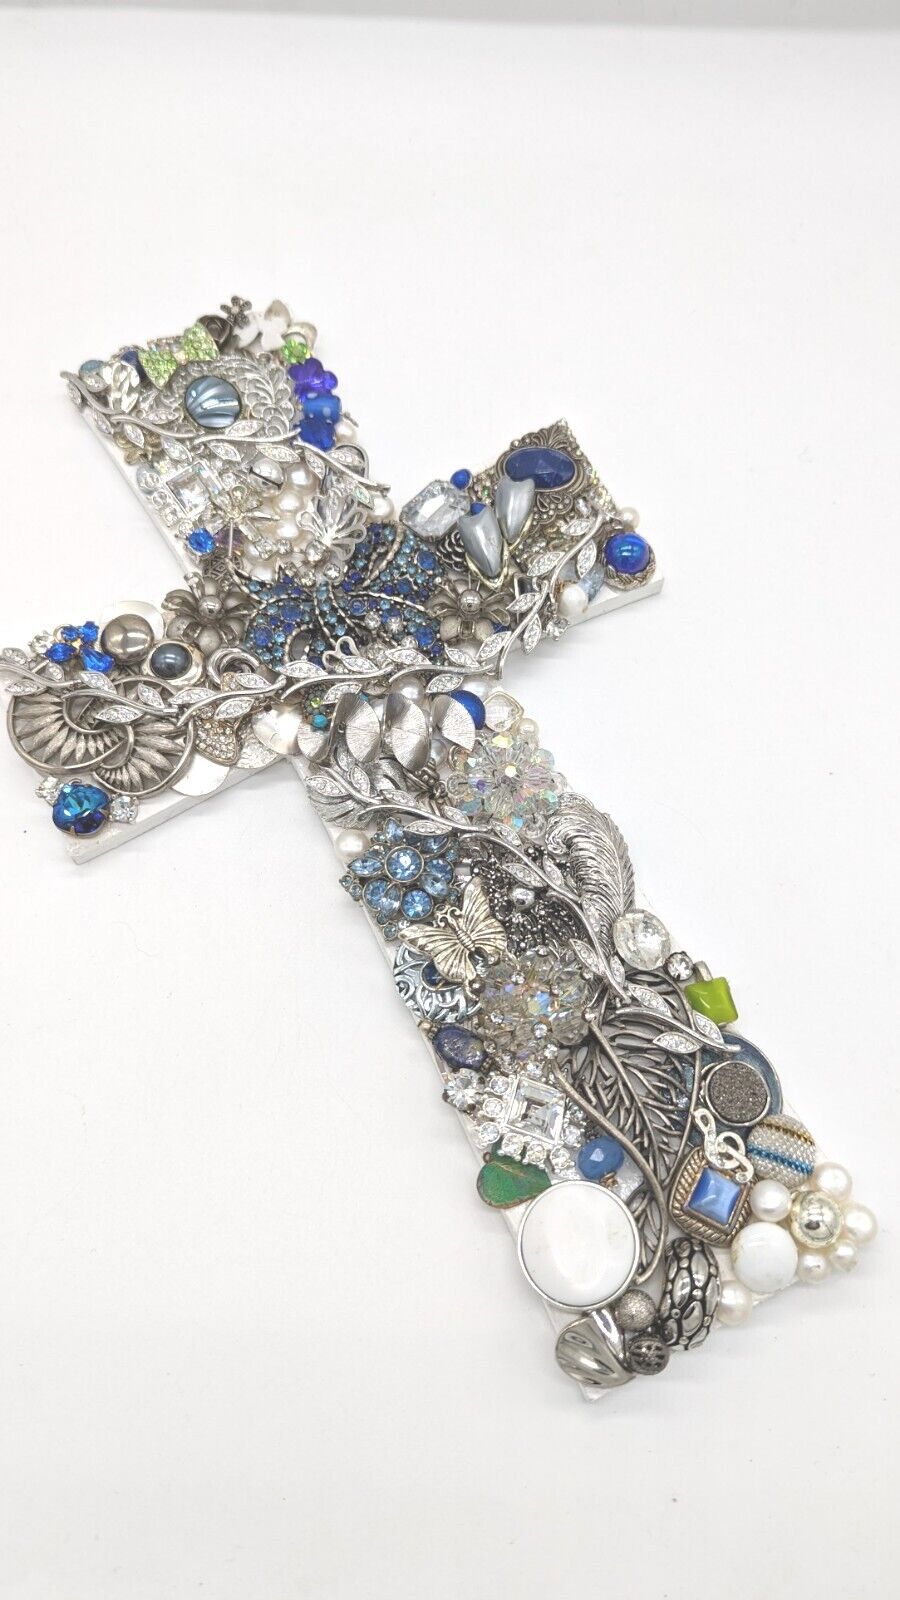 Vintage Jewelry Artwork Silver Tone Cross Wall Hanging Handmade One Of A Kind